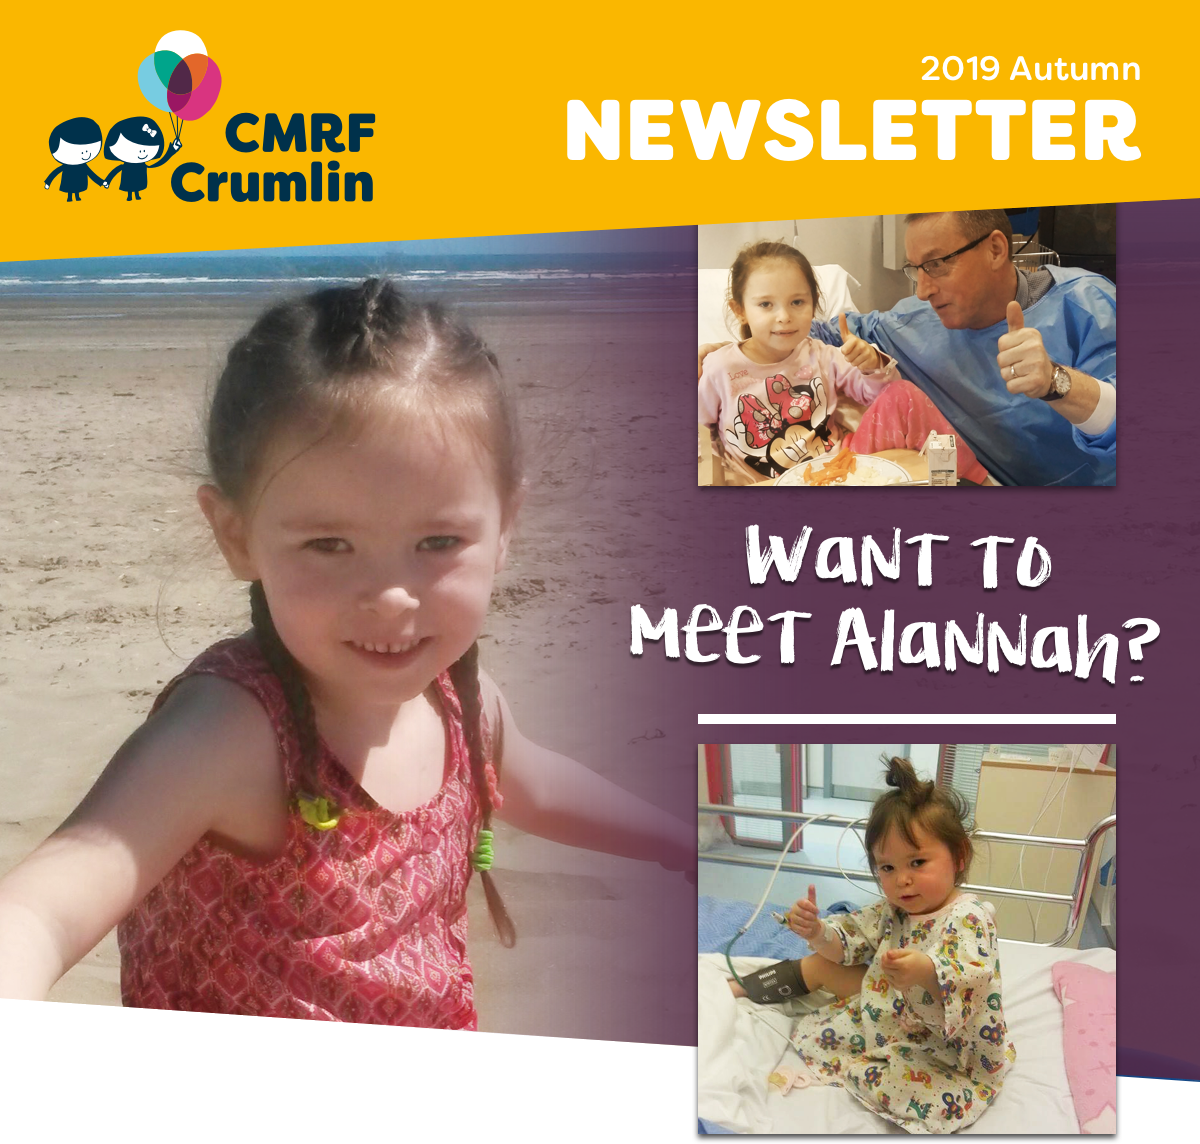 CMRF Crumlin - Alannah whose life you helped to save more than once!